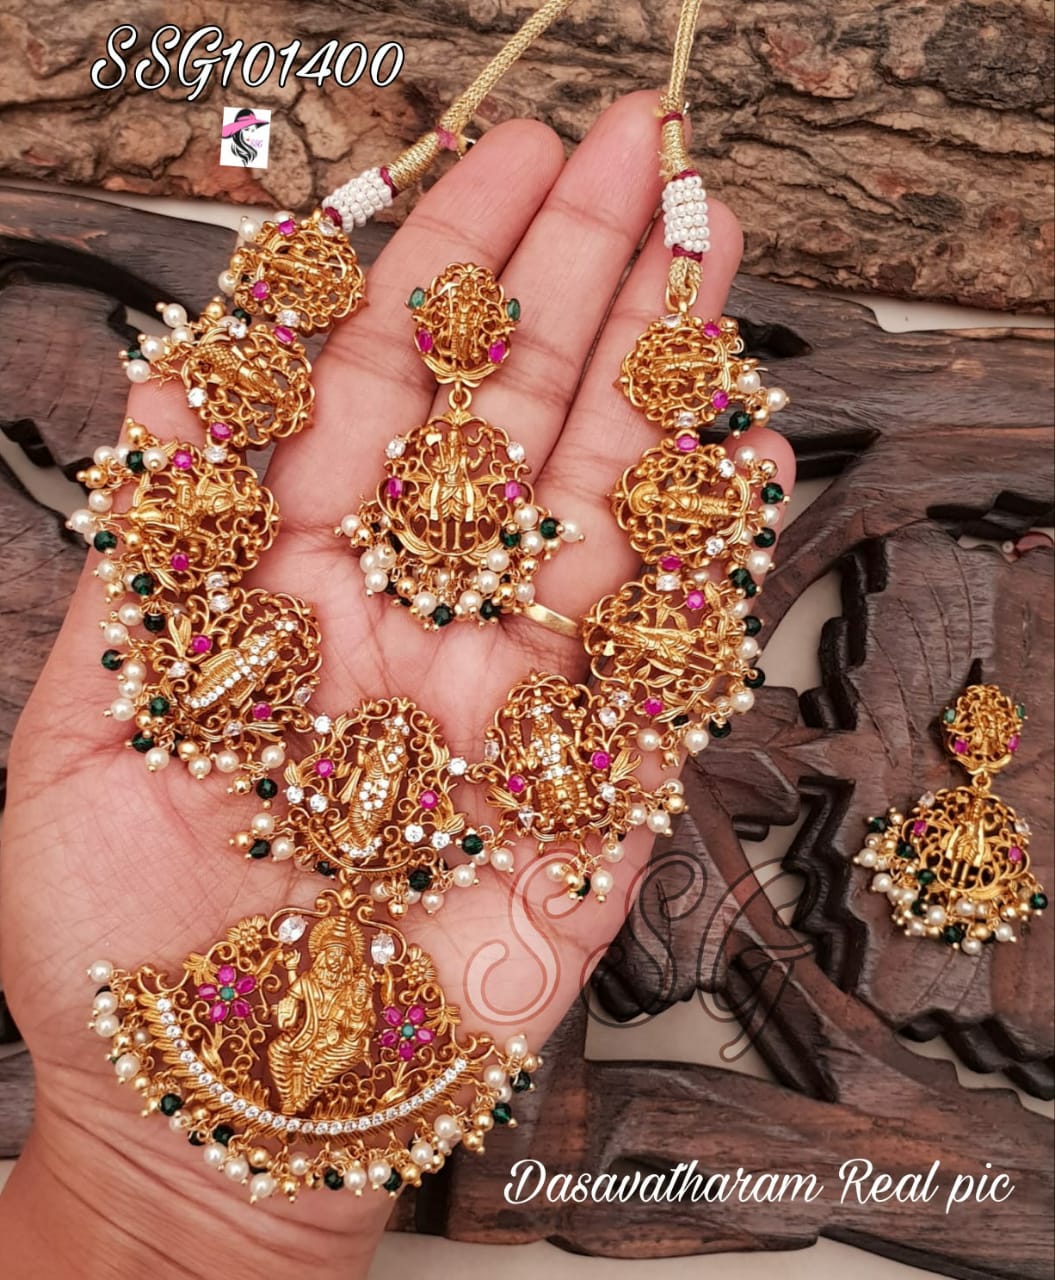 jewellery collection